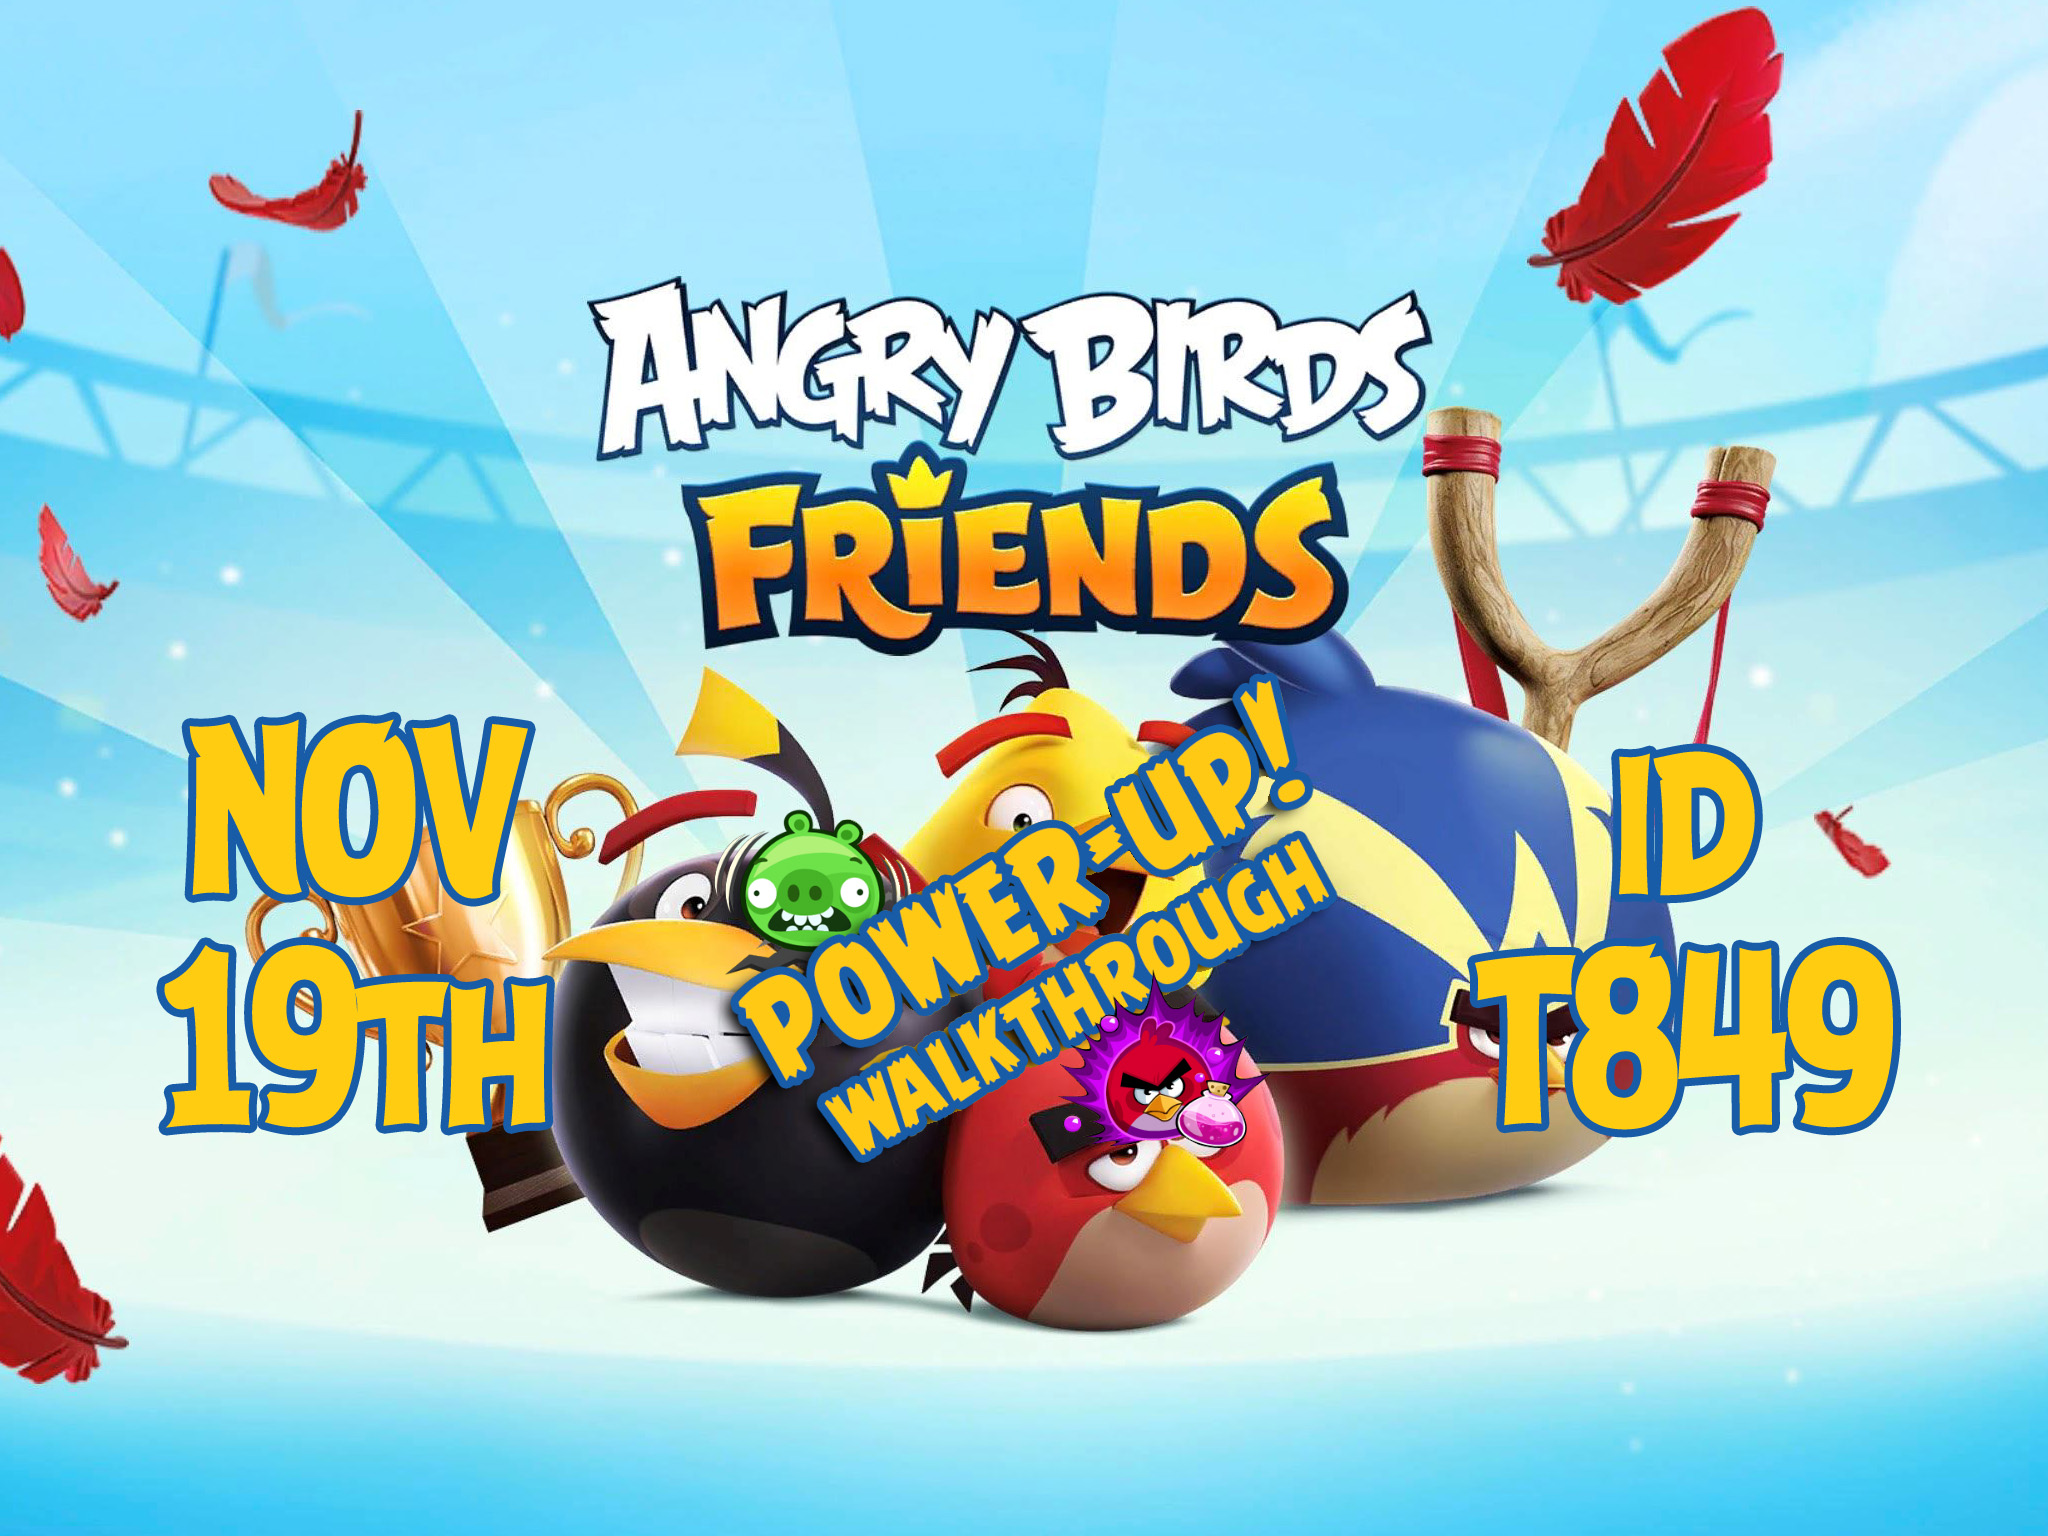 Angry-Birds-Friends-Tournament-T849-Feature-Image-PU